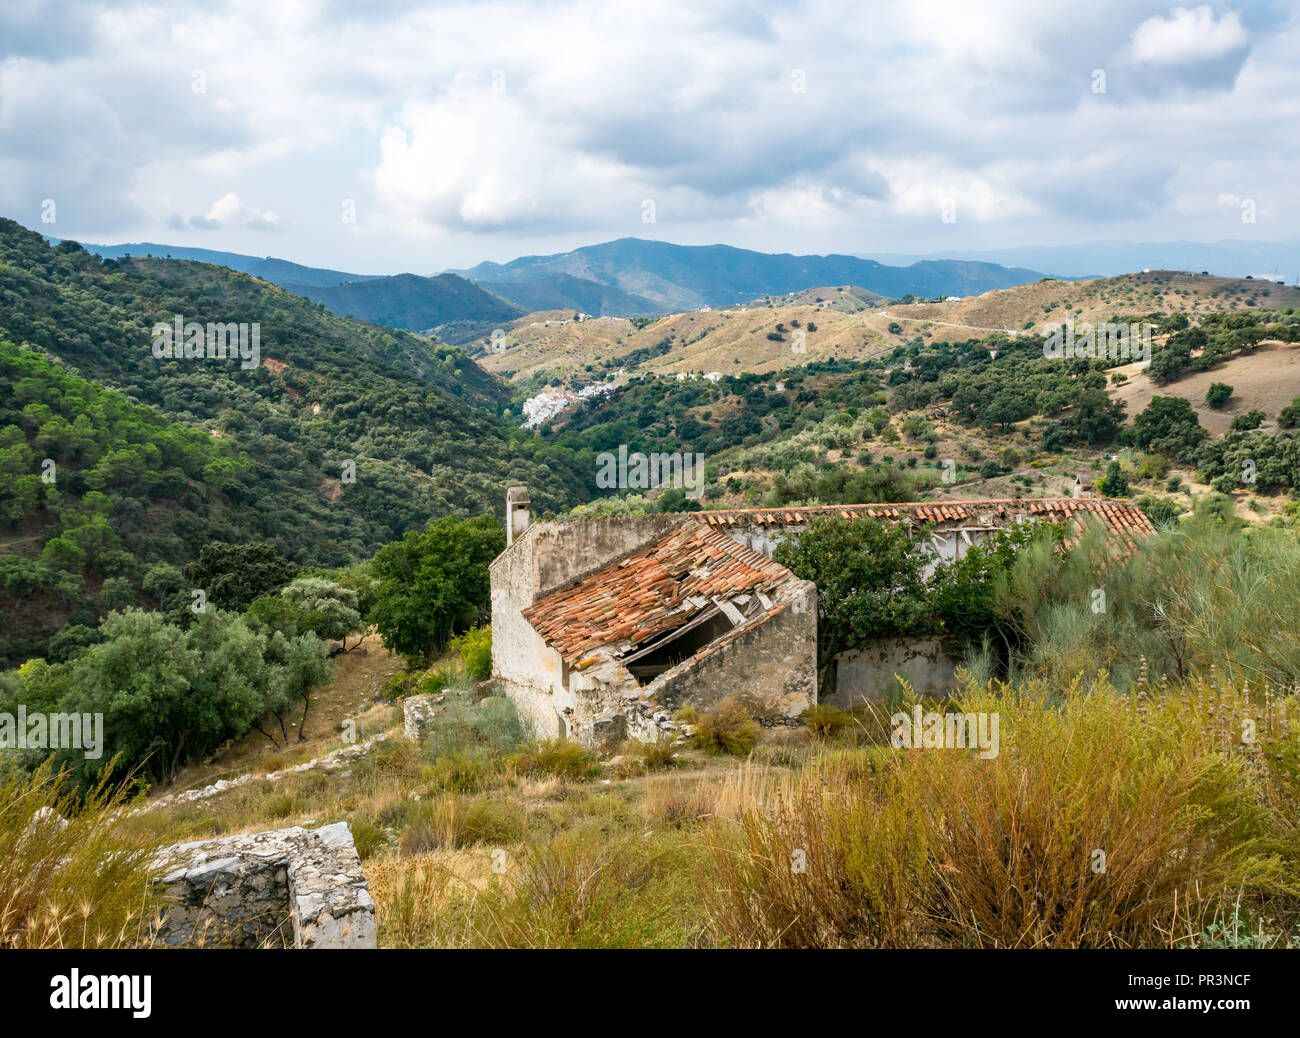 GR mountain walking route 249 view valley and ruined buildings, Sierras de Tejeda Natural Park, Salares, Axarquia, Andalucia, Spain Stock Photo